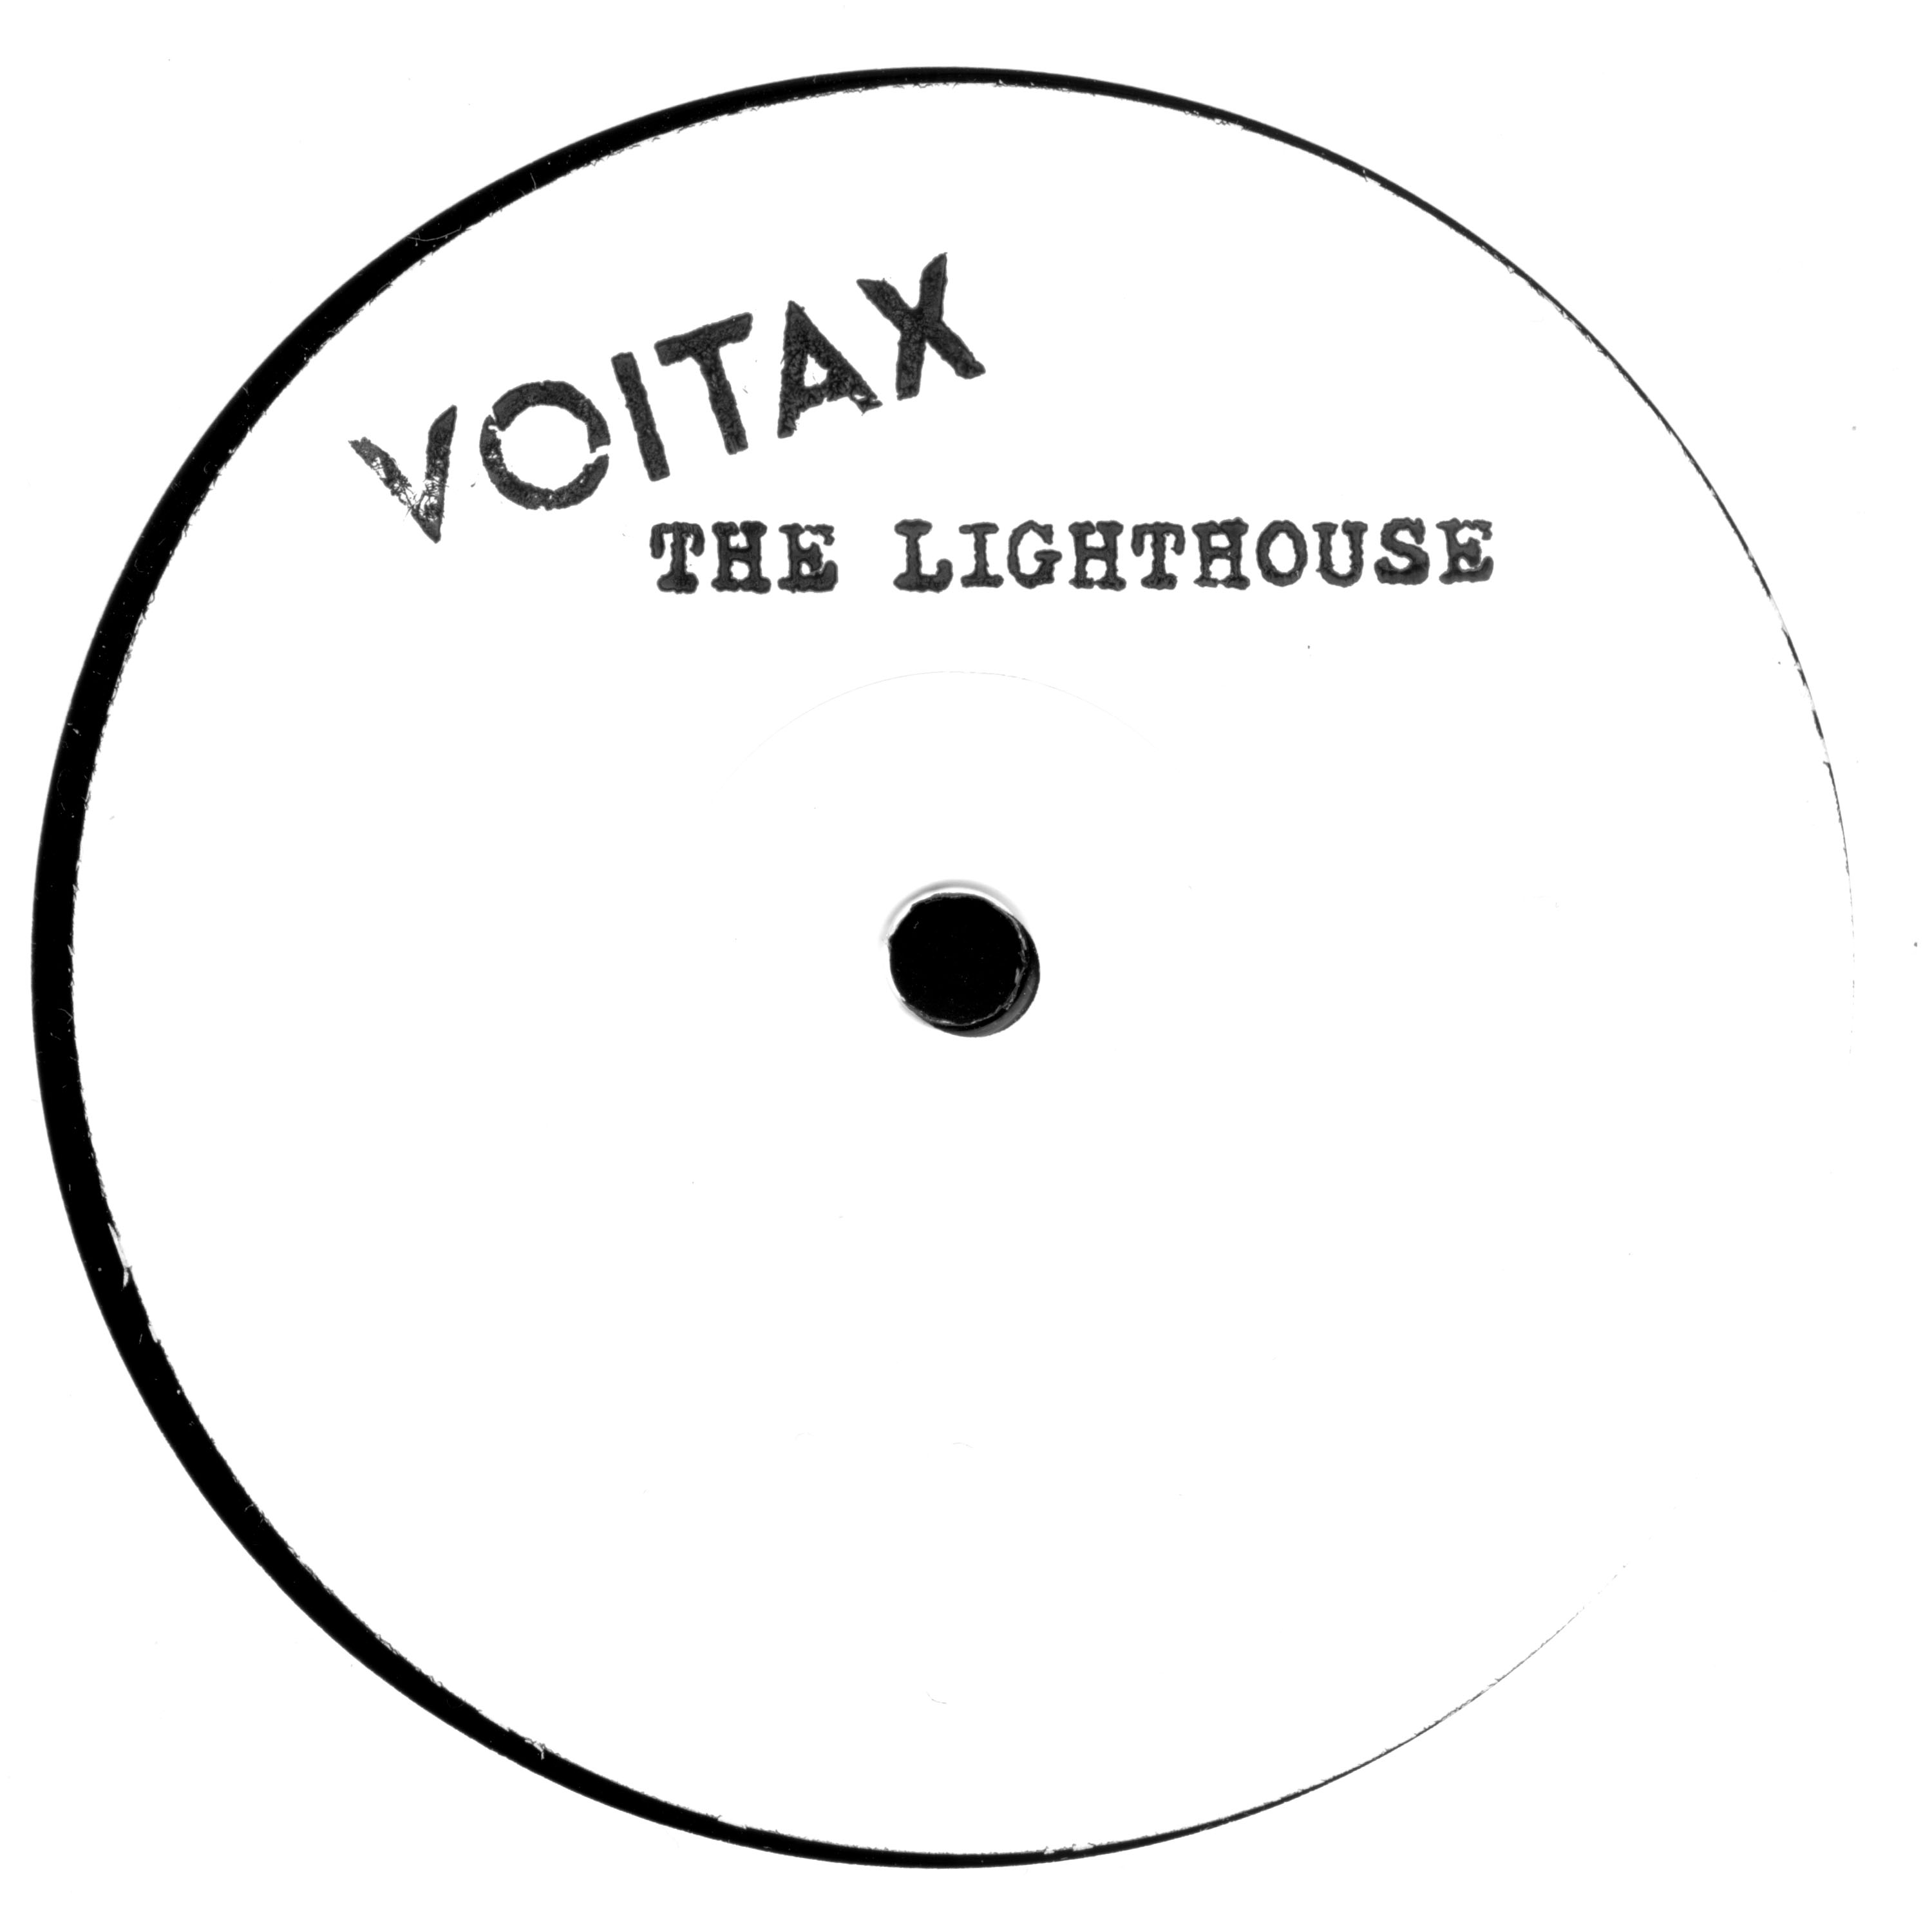 VOITAX Releases